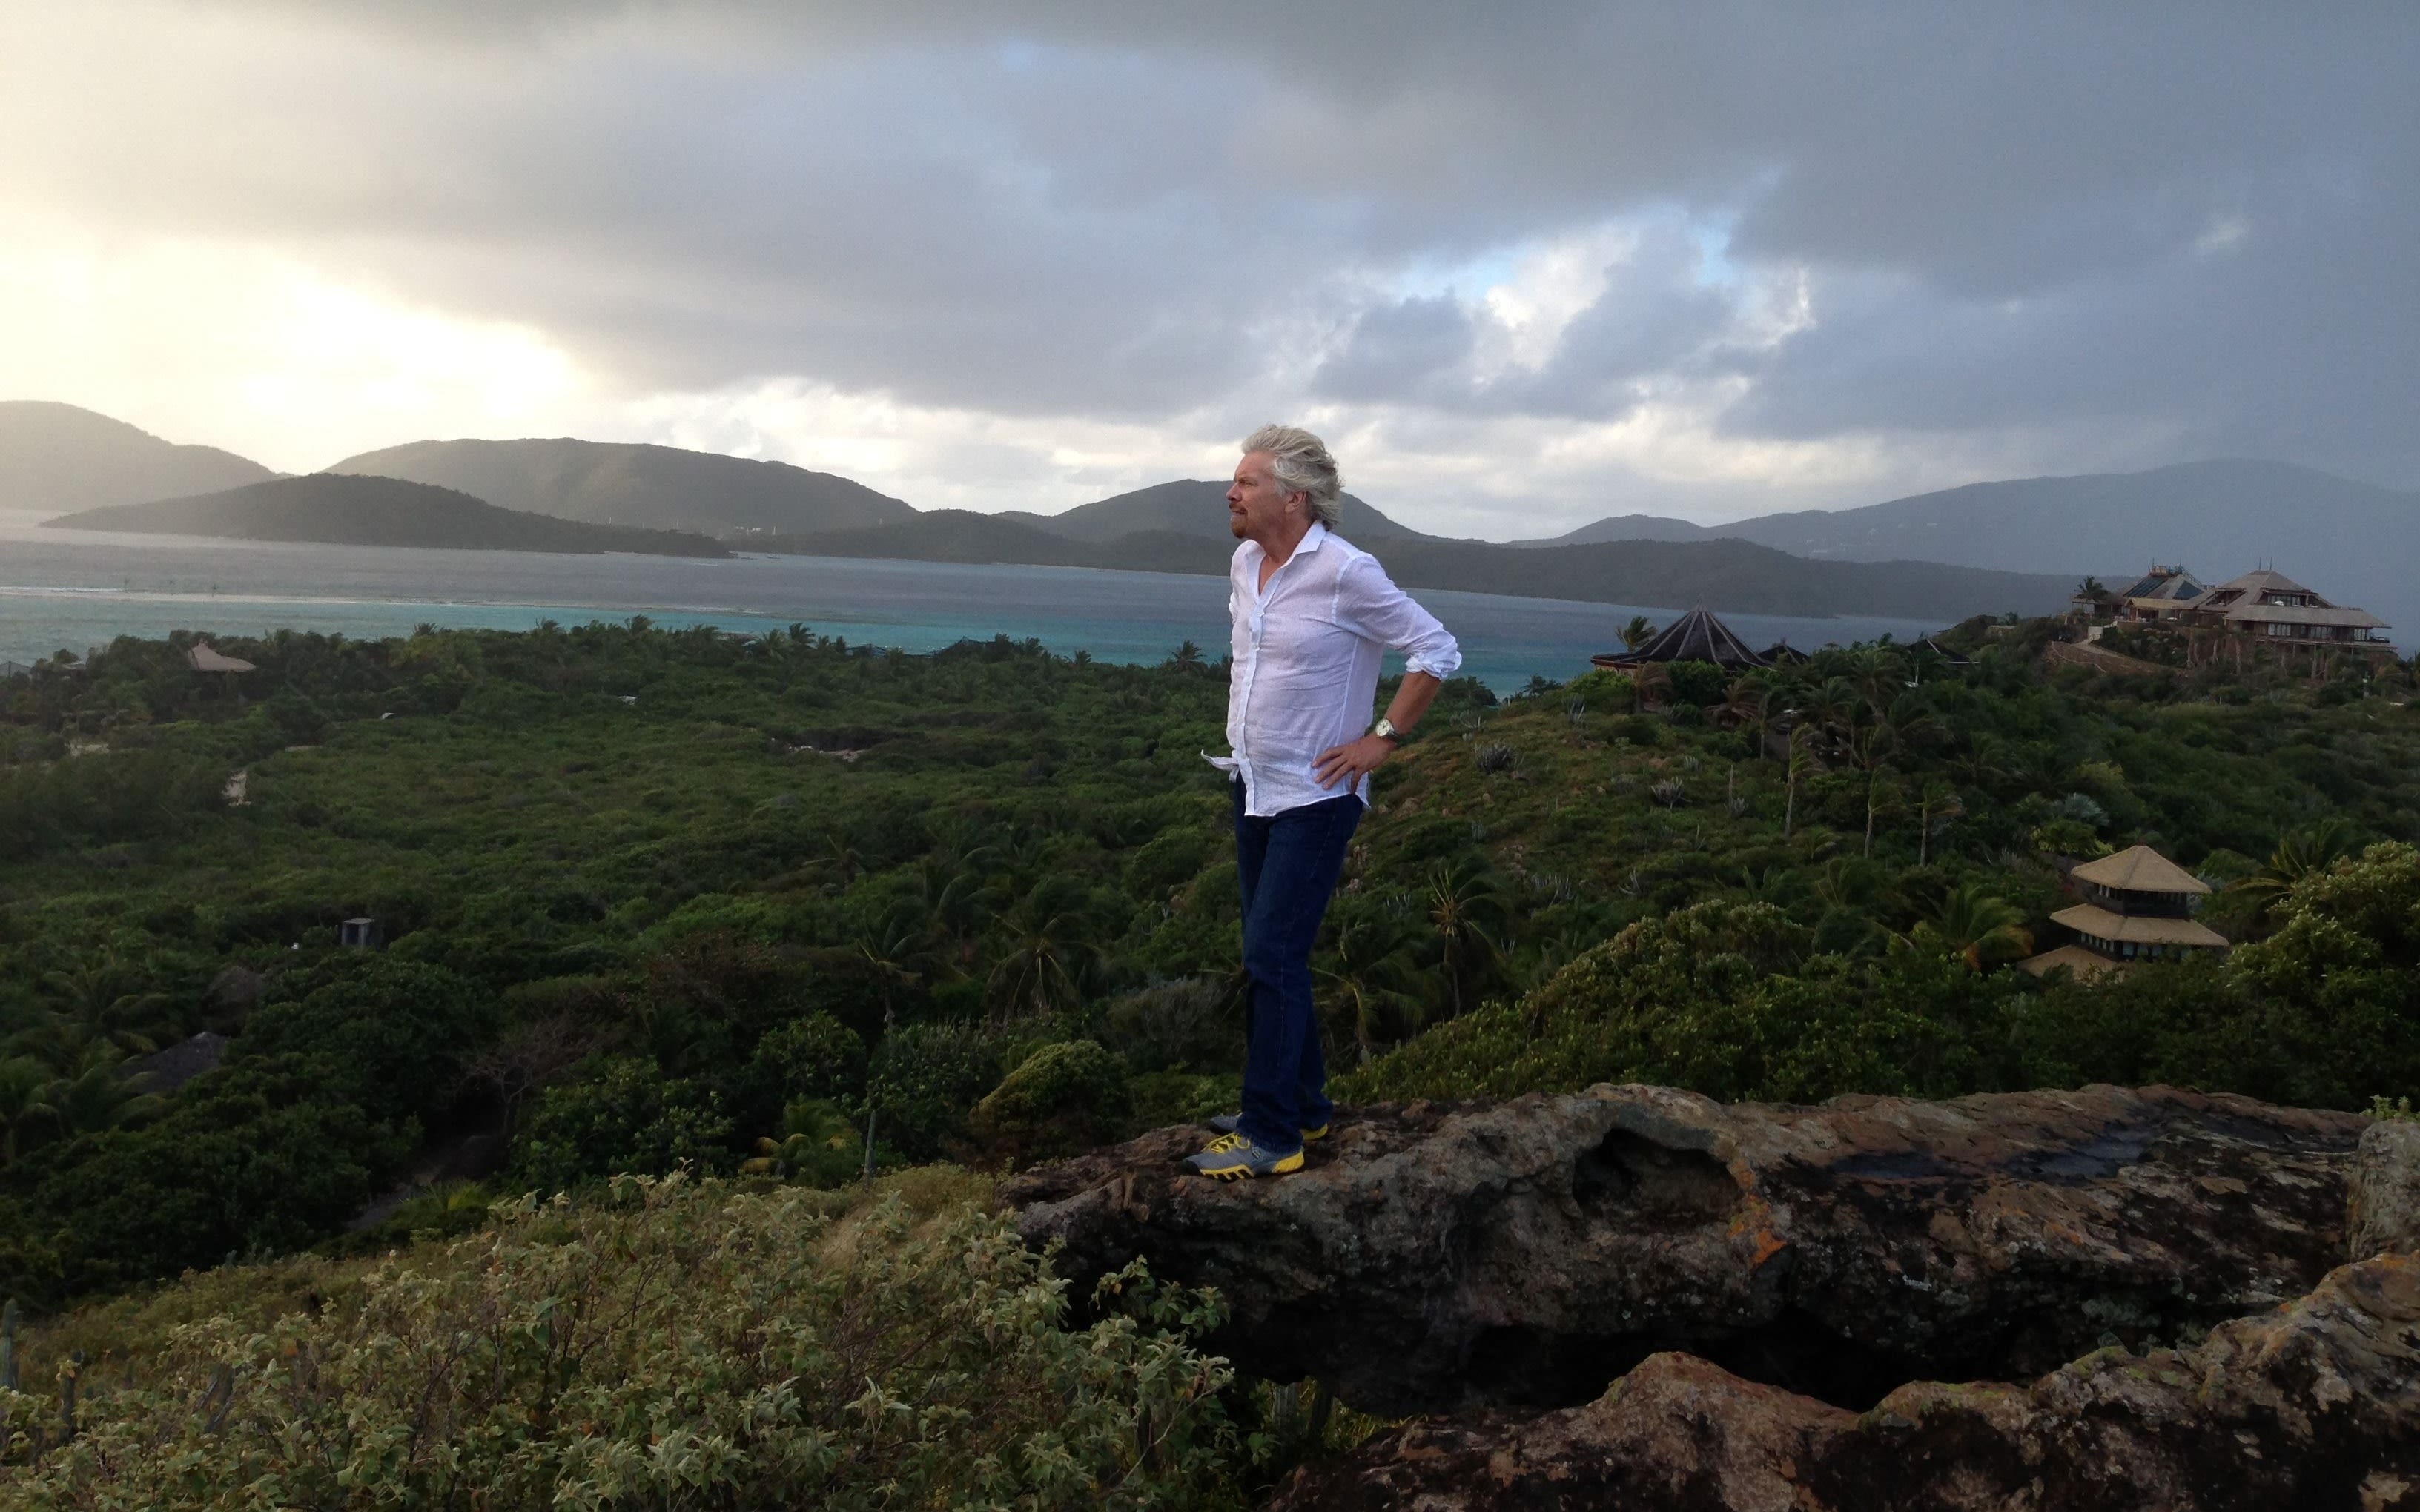 Richard Branson standing on a hill on Necker Island with the house and the ocean in the background